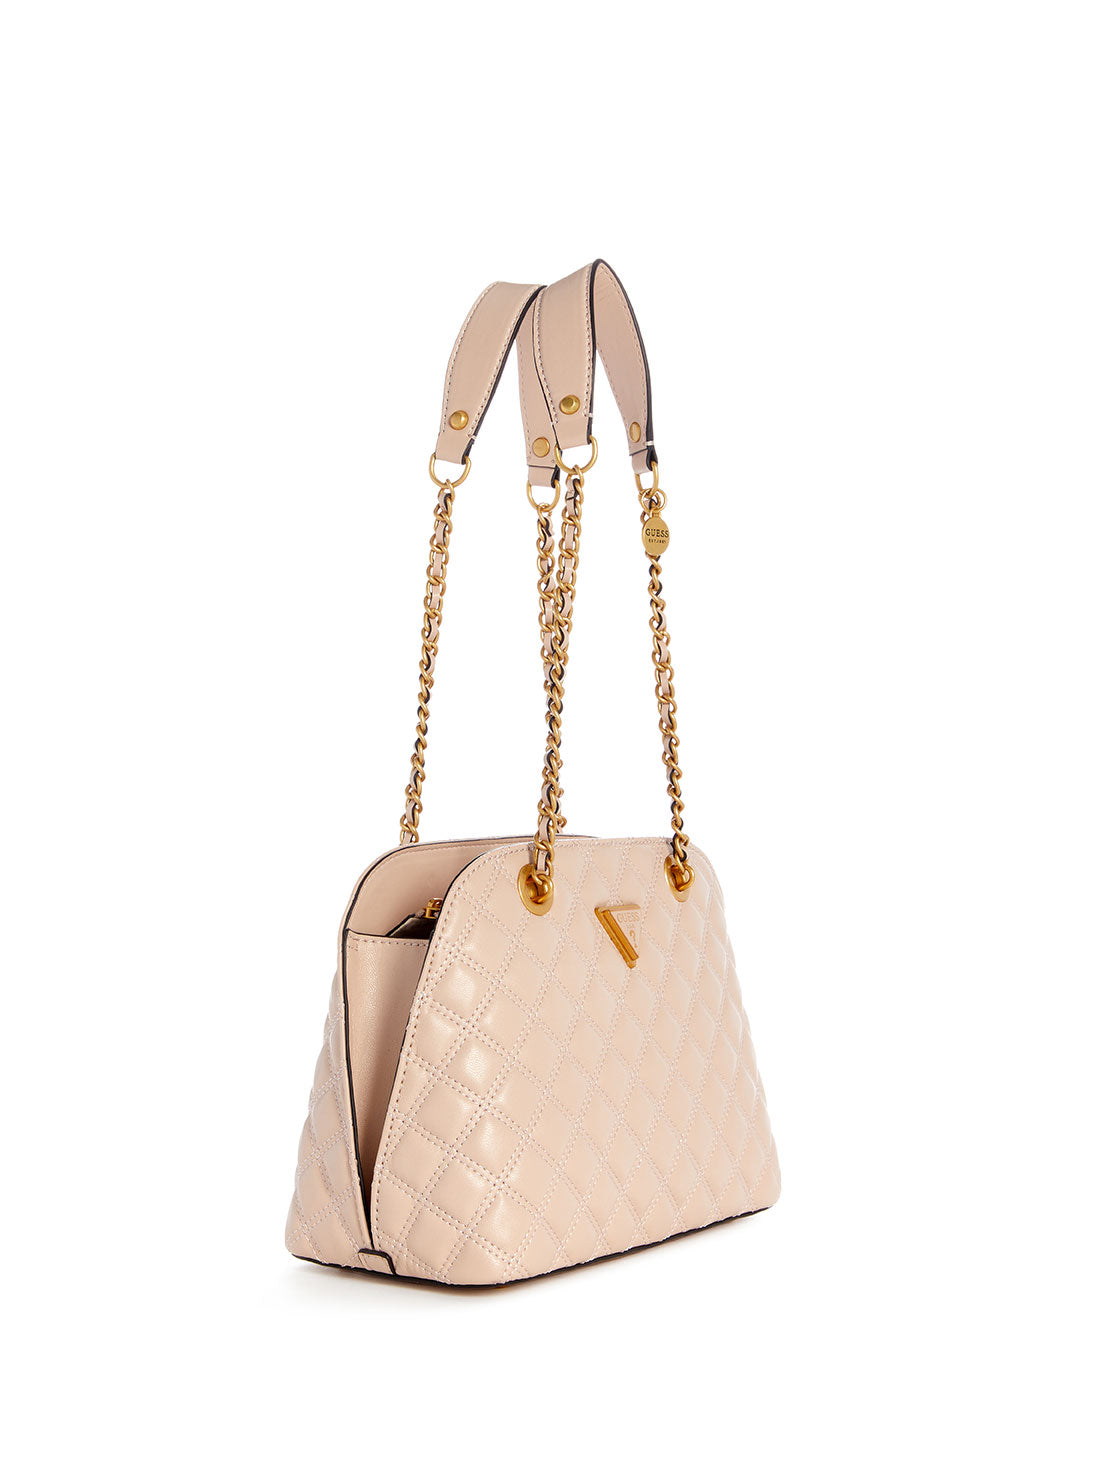 GUESS Light Beige Giully Dome Satchel Bag side view